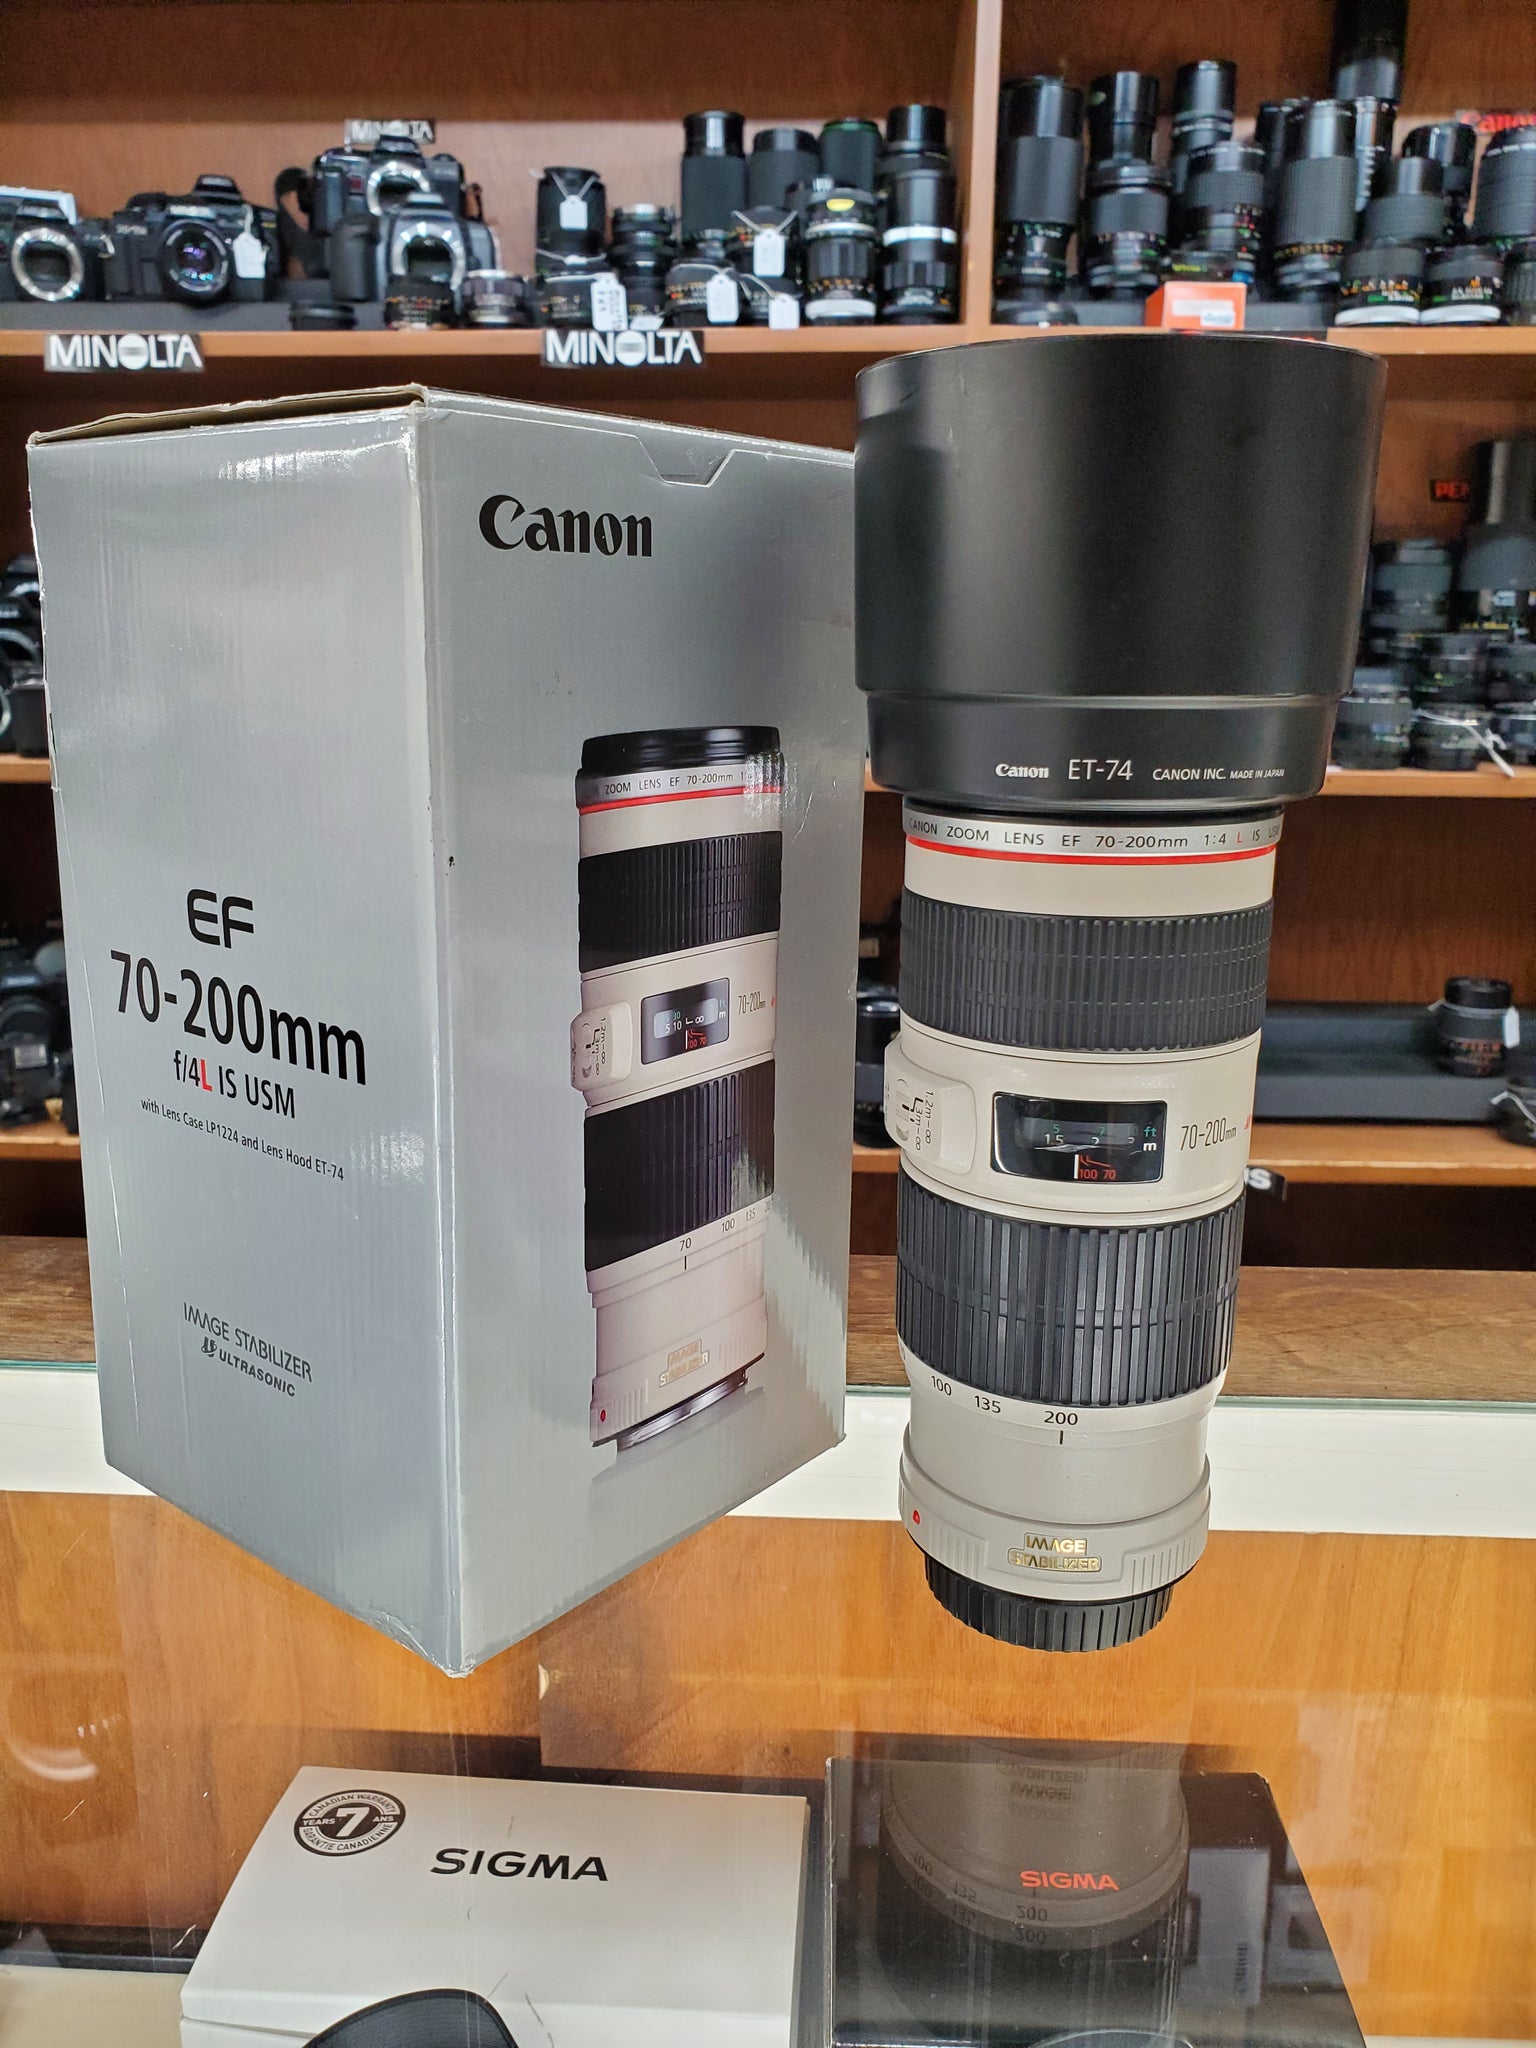 Canon 70-200mm F4 L IS USM lens - Pro Full Frame Telephoto - Used